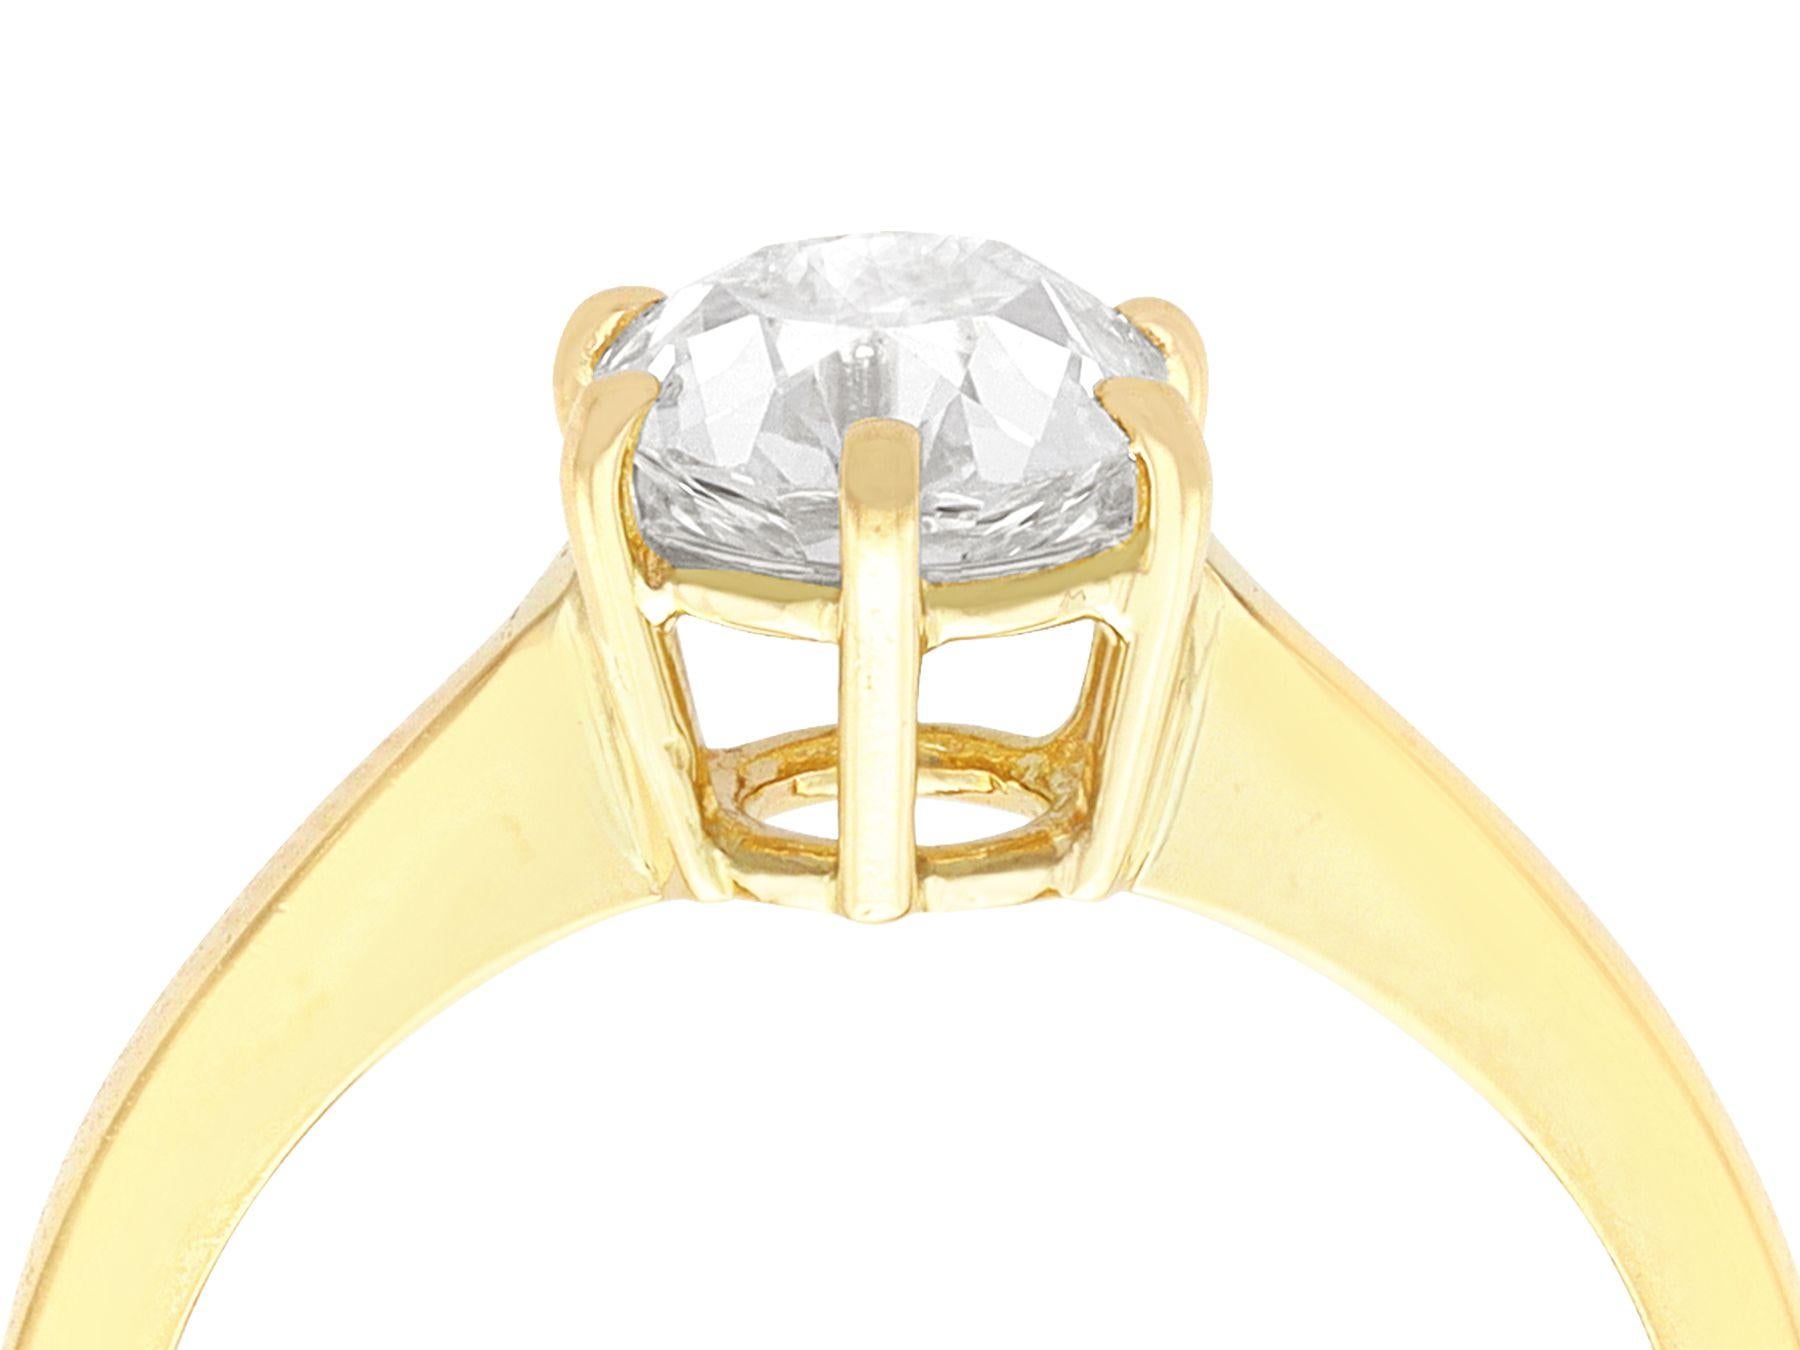 A stunning, fine, and impressive 1.38 Carat diamond and 18 karat yellow gold solitaire ring; part of our diverse collection of Victorian jewelry and estate jewelry.

This stunning gold solitaire ring has been crafted in 18k yellow gold.

The plain